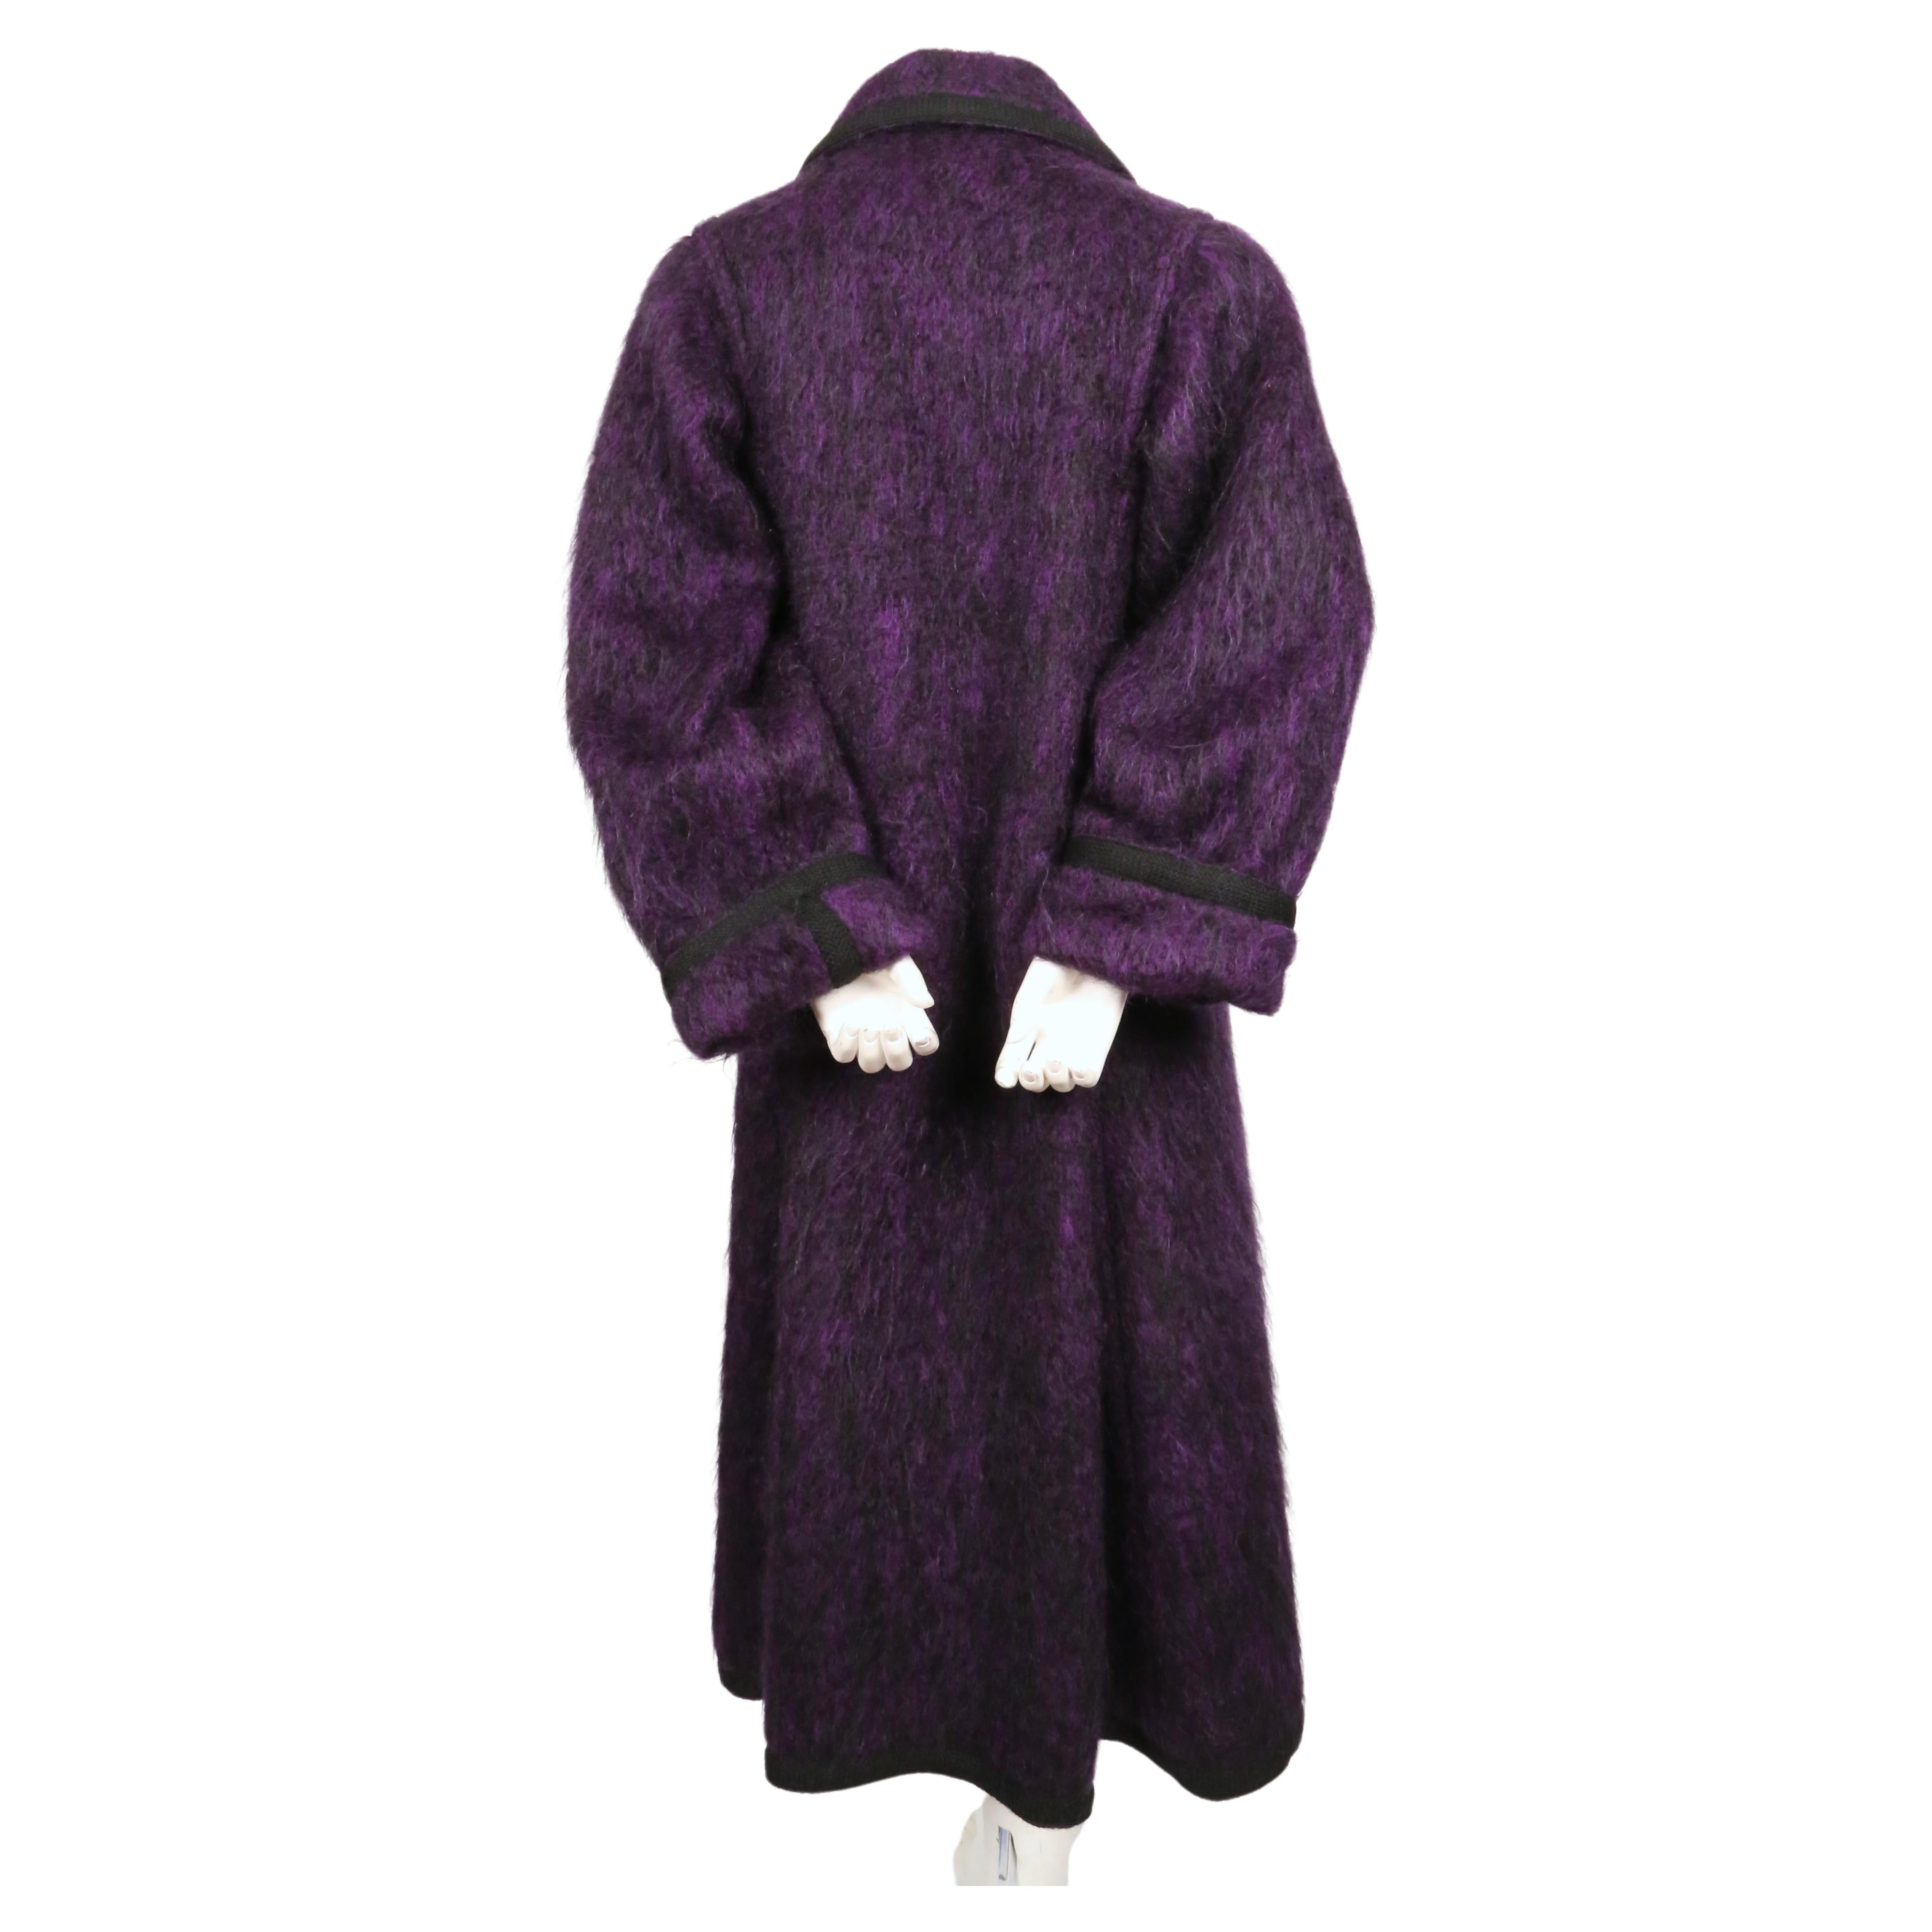 1960's YVES SAINT LAURENT violet purple brushed wool coat with braided trim For Sale 5